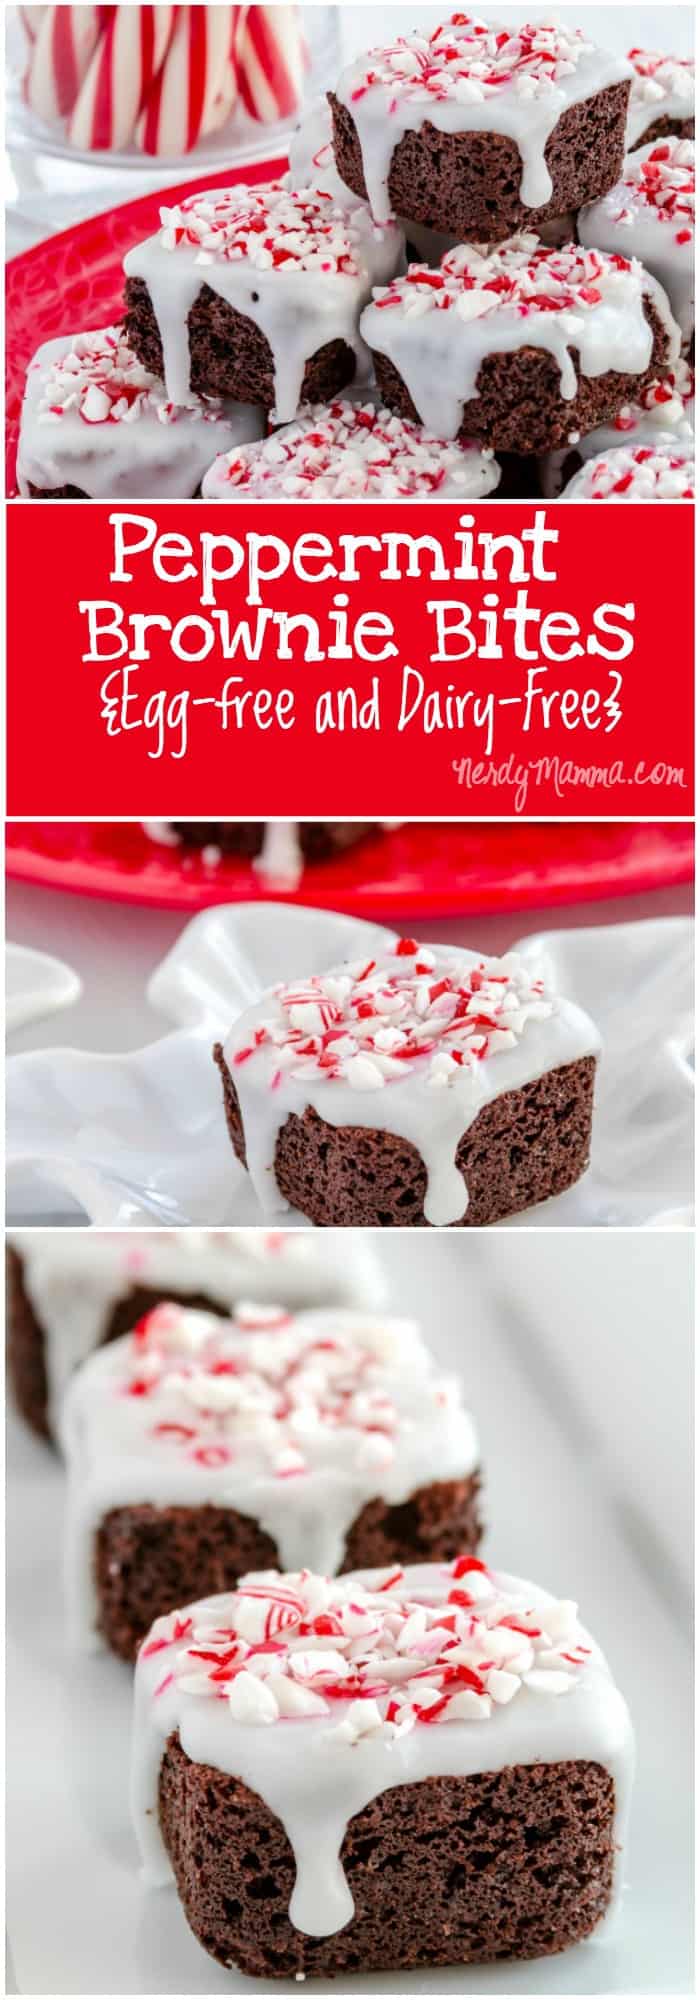 These peppermint brownie bites are the perfect dessert for Christmas...egg-free and dairy-free, they are allergy-friendly and if you make it with gluten-free flour...well, everyone can enjoy them...